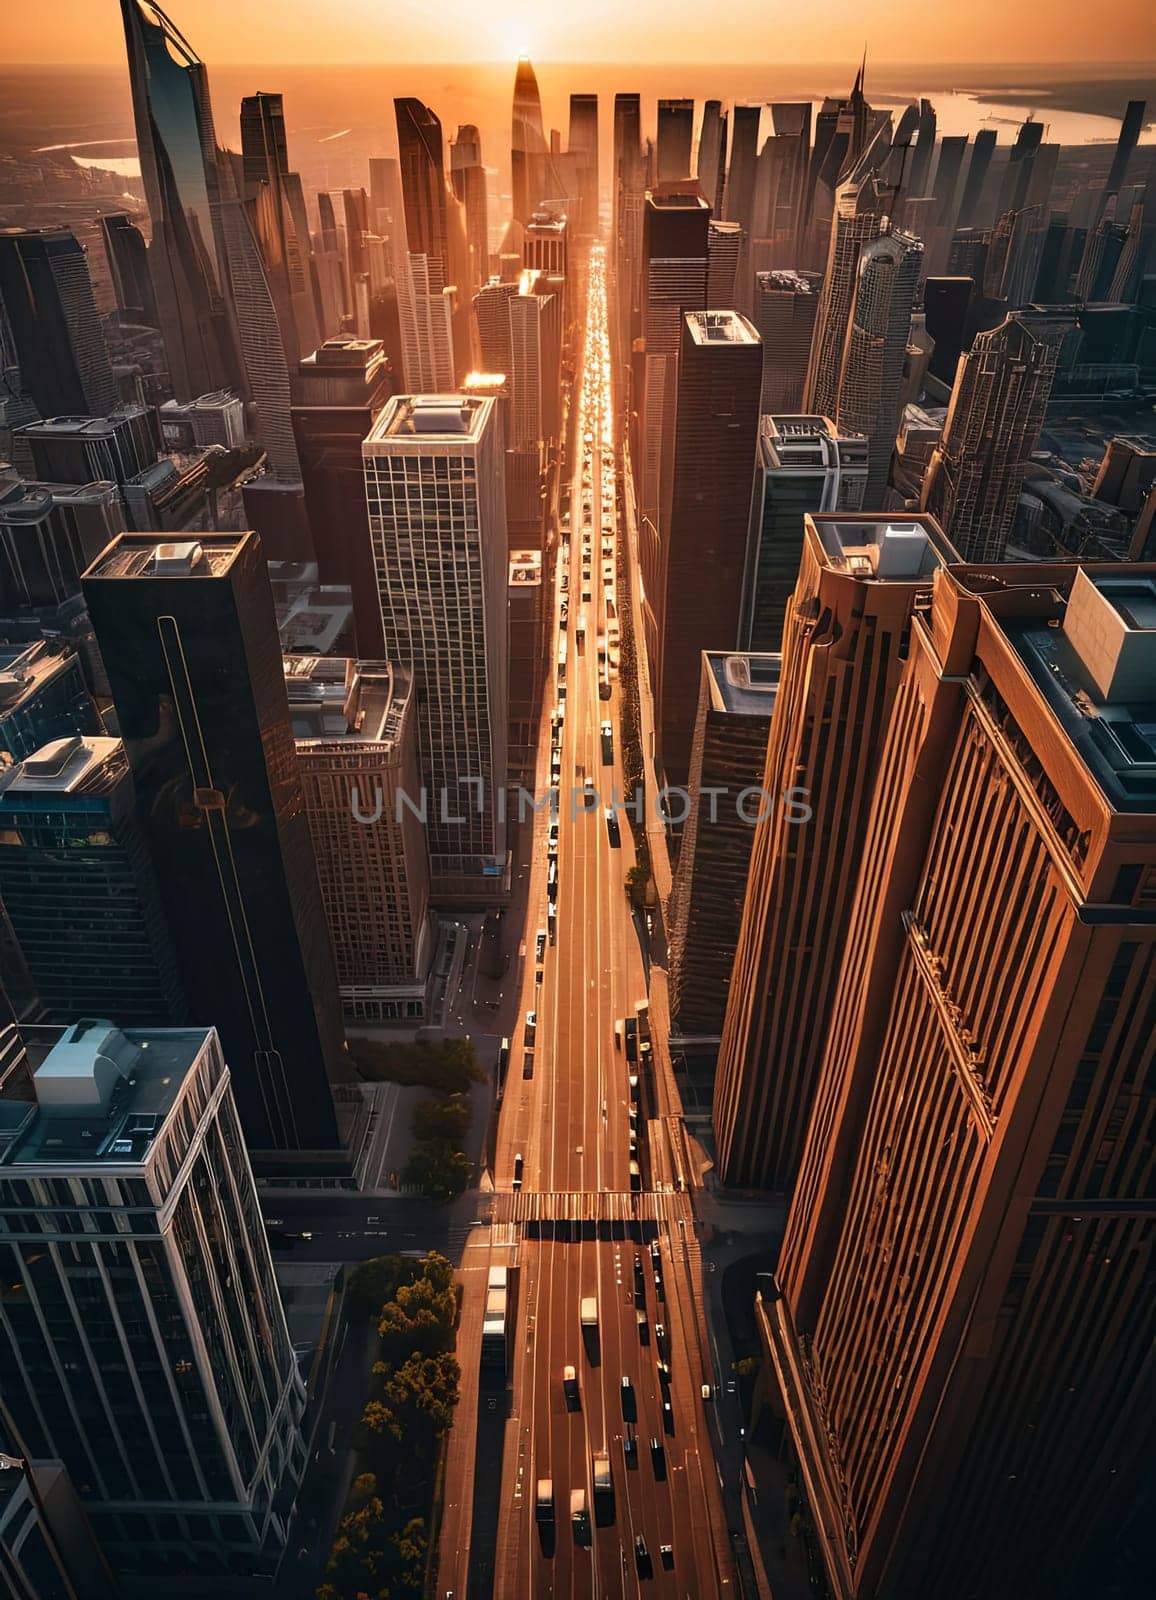 High-rise buildings line both sides of a wide street in a bustling city,viewed from above bathed in the warm glow of sunset.